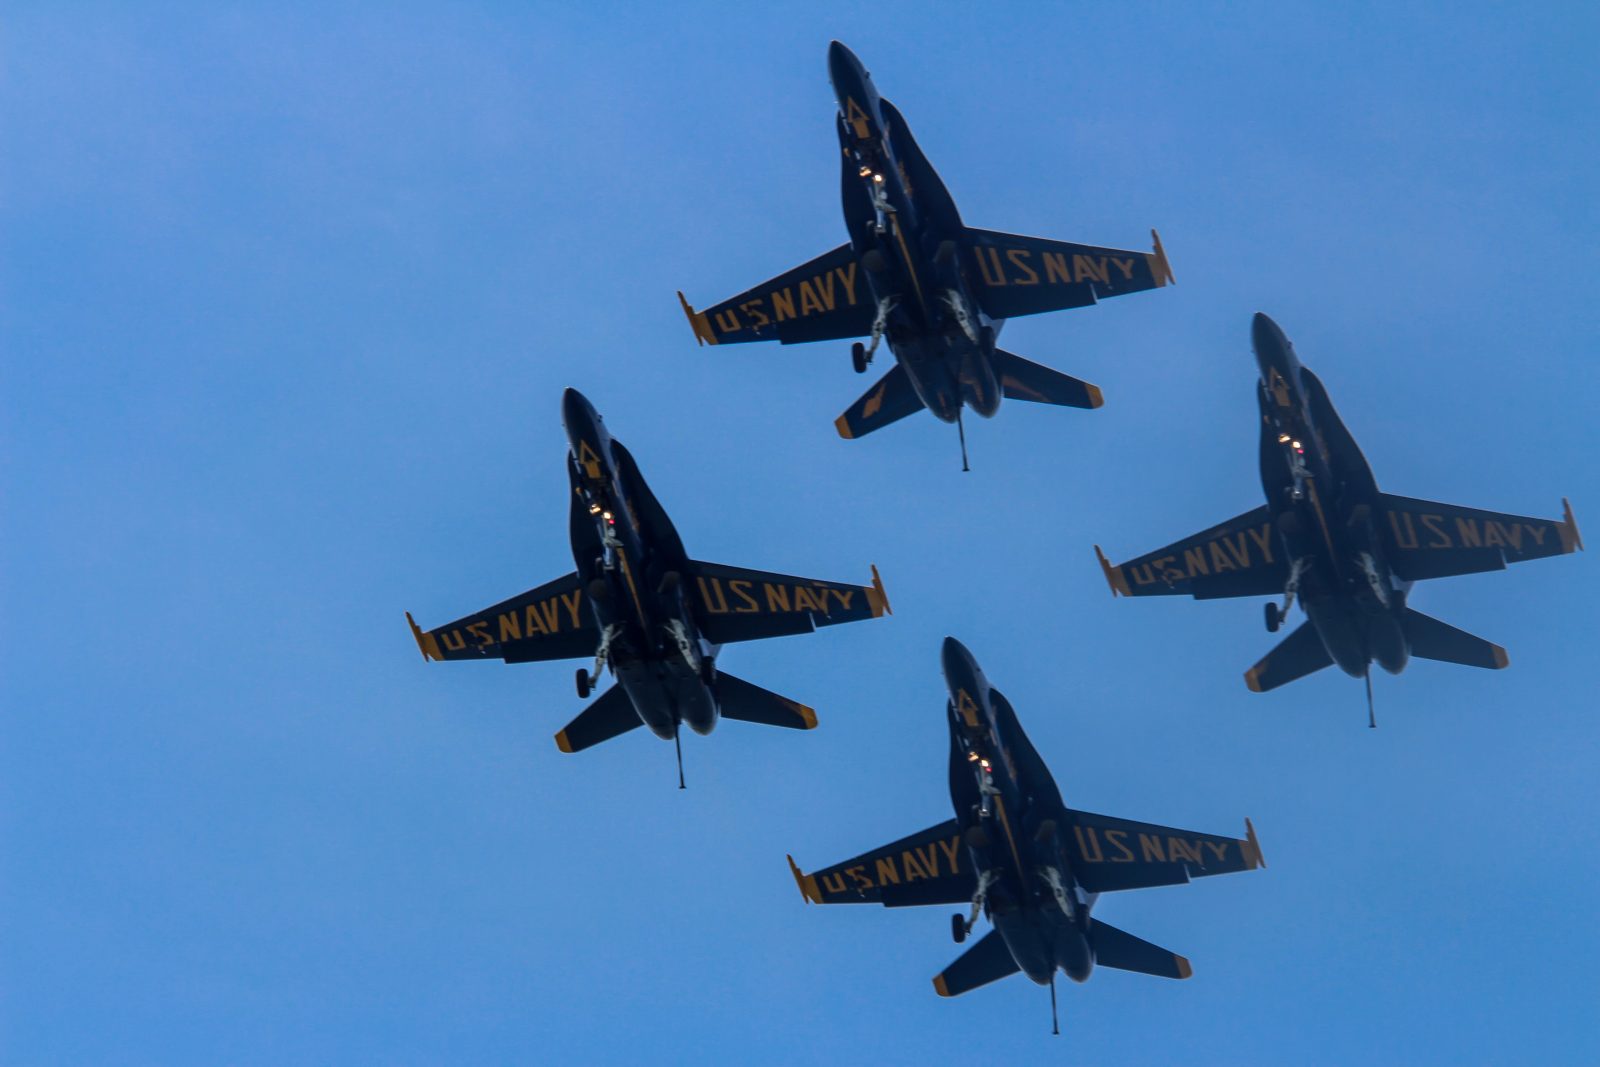 Imagine Viewing the Blue Angels Over the Chesapeake Bay Aboard the